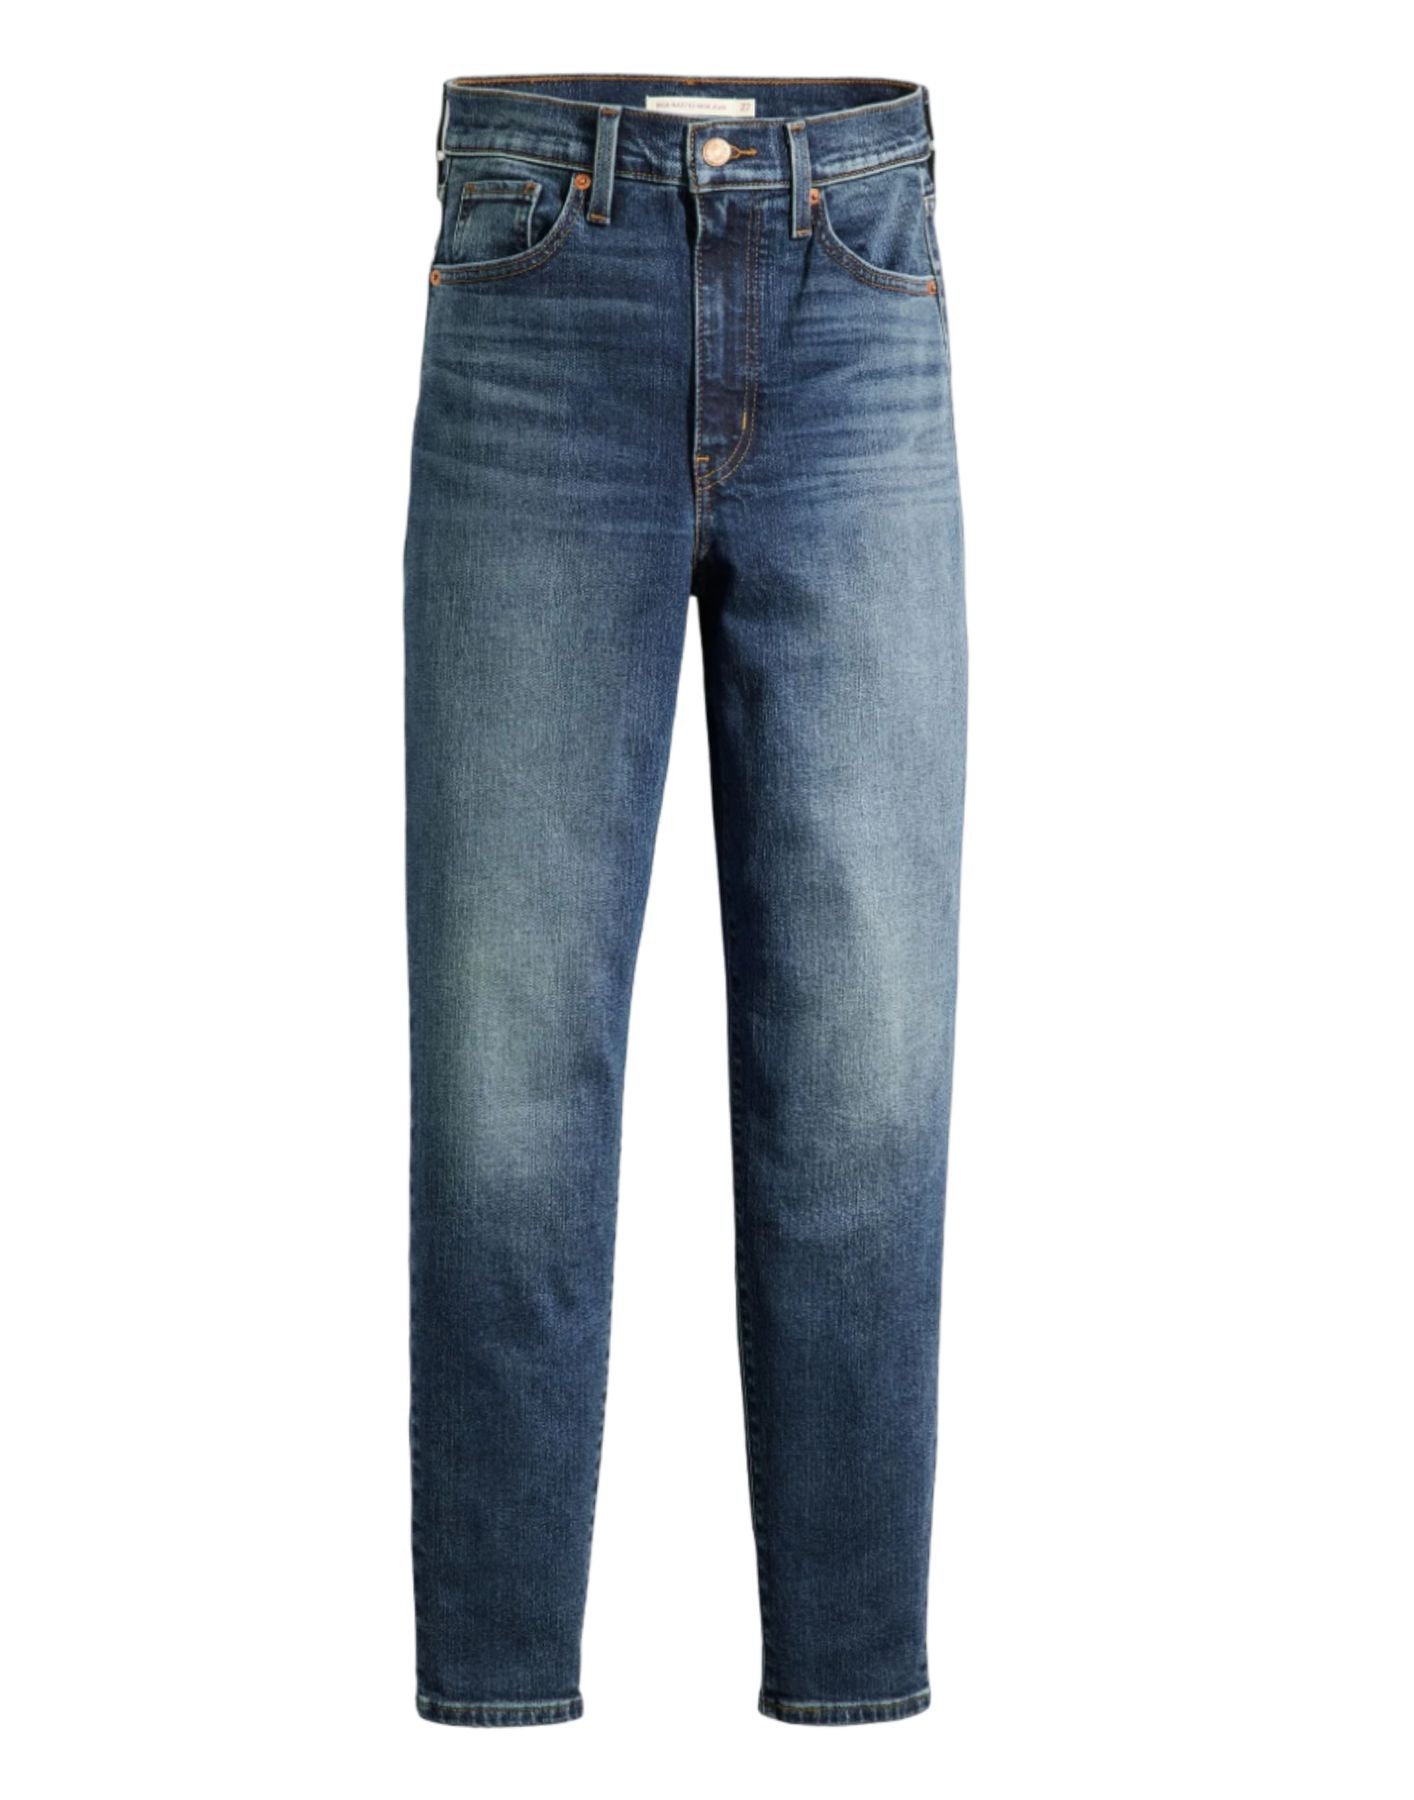 Jeans for woman A35060015 Levi's